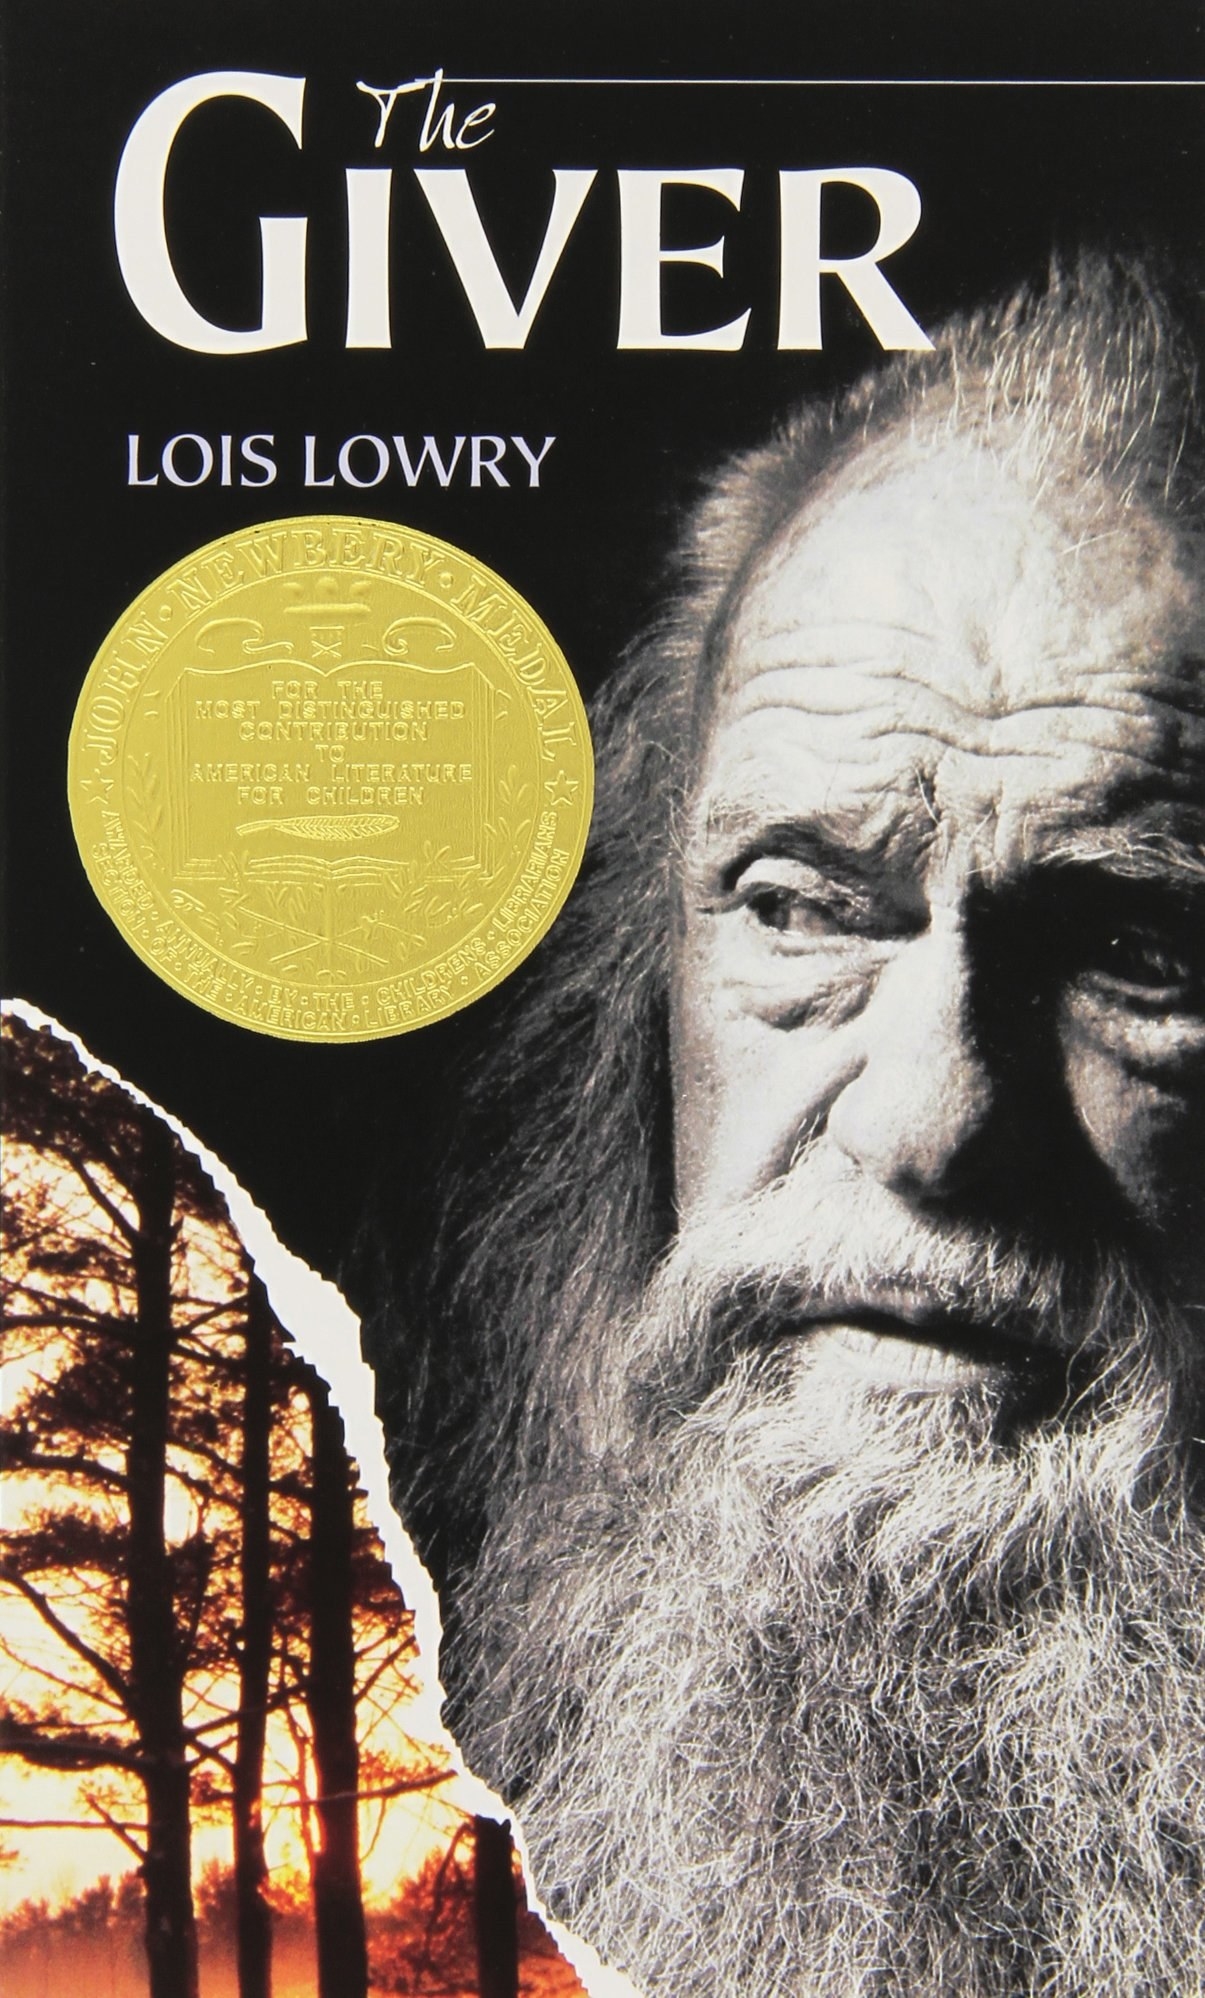 The cover of The Giver&quot; by Lois Lowry.